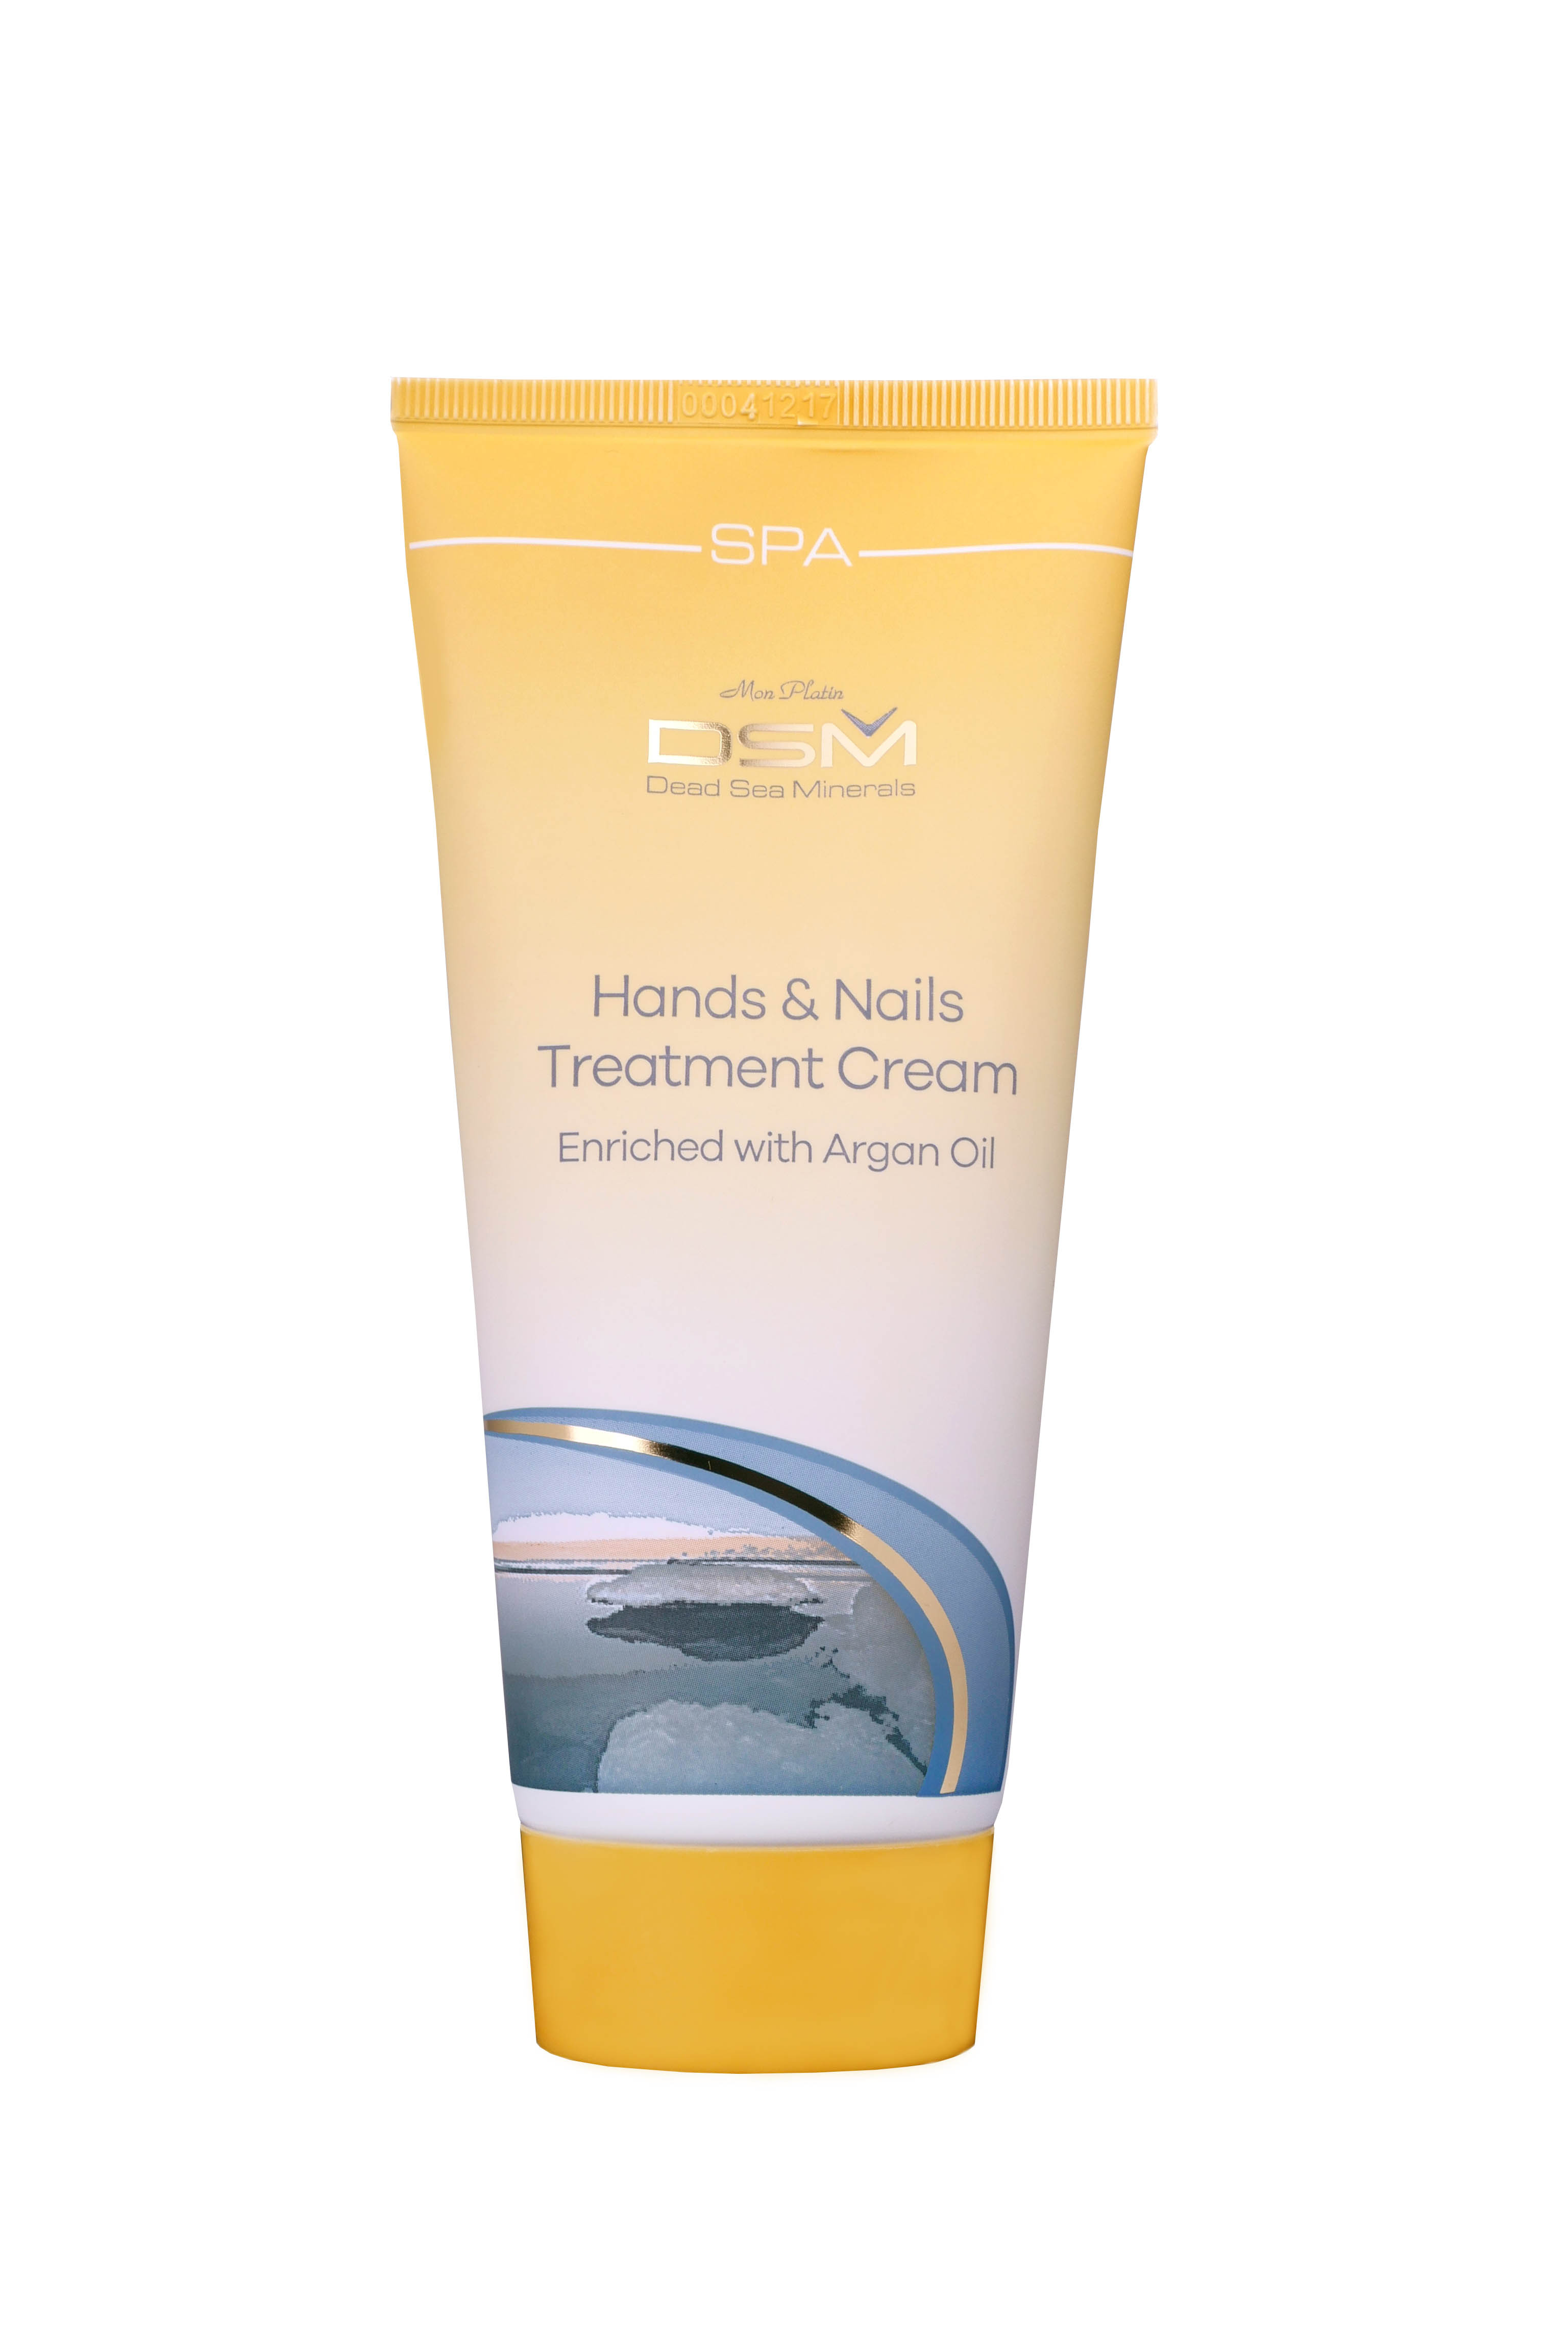 Hands & Nails Treatment Cream with Argan Oil